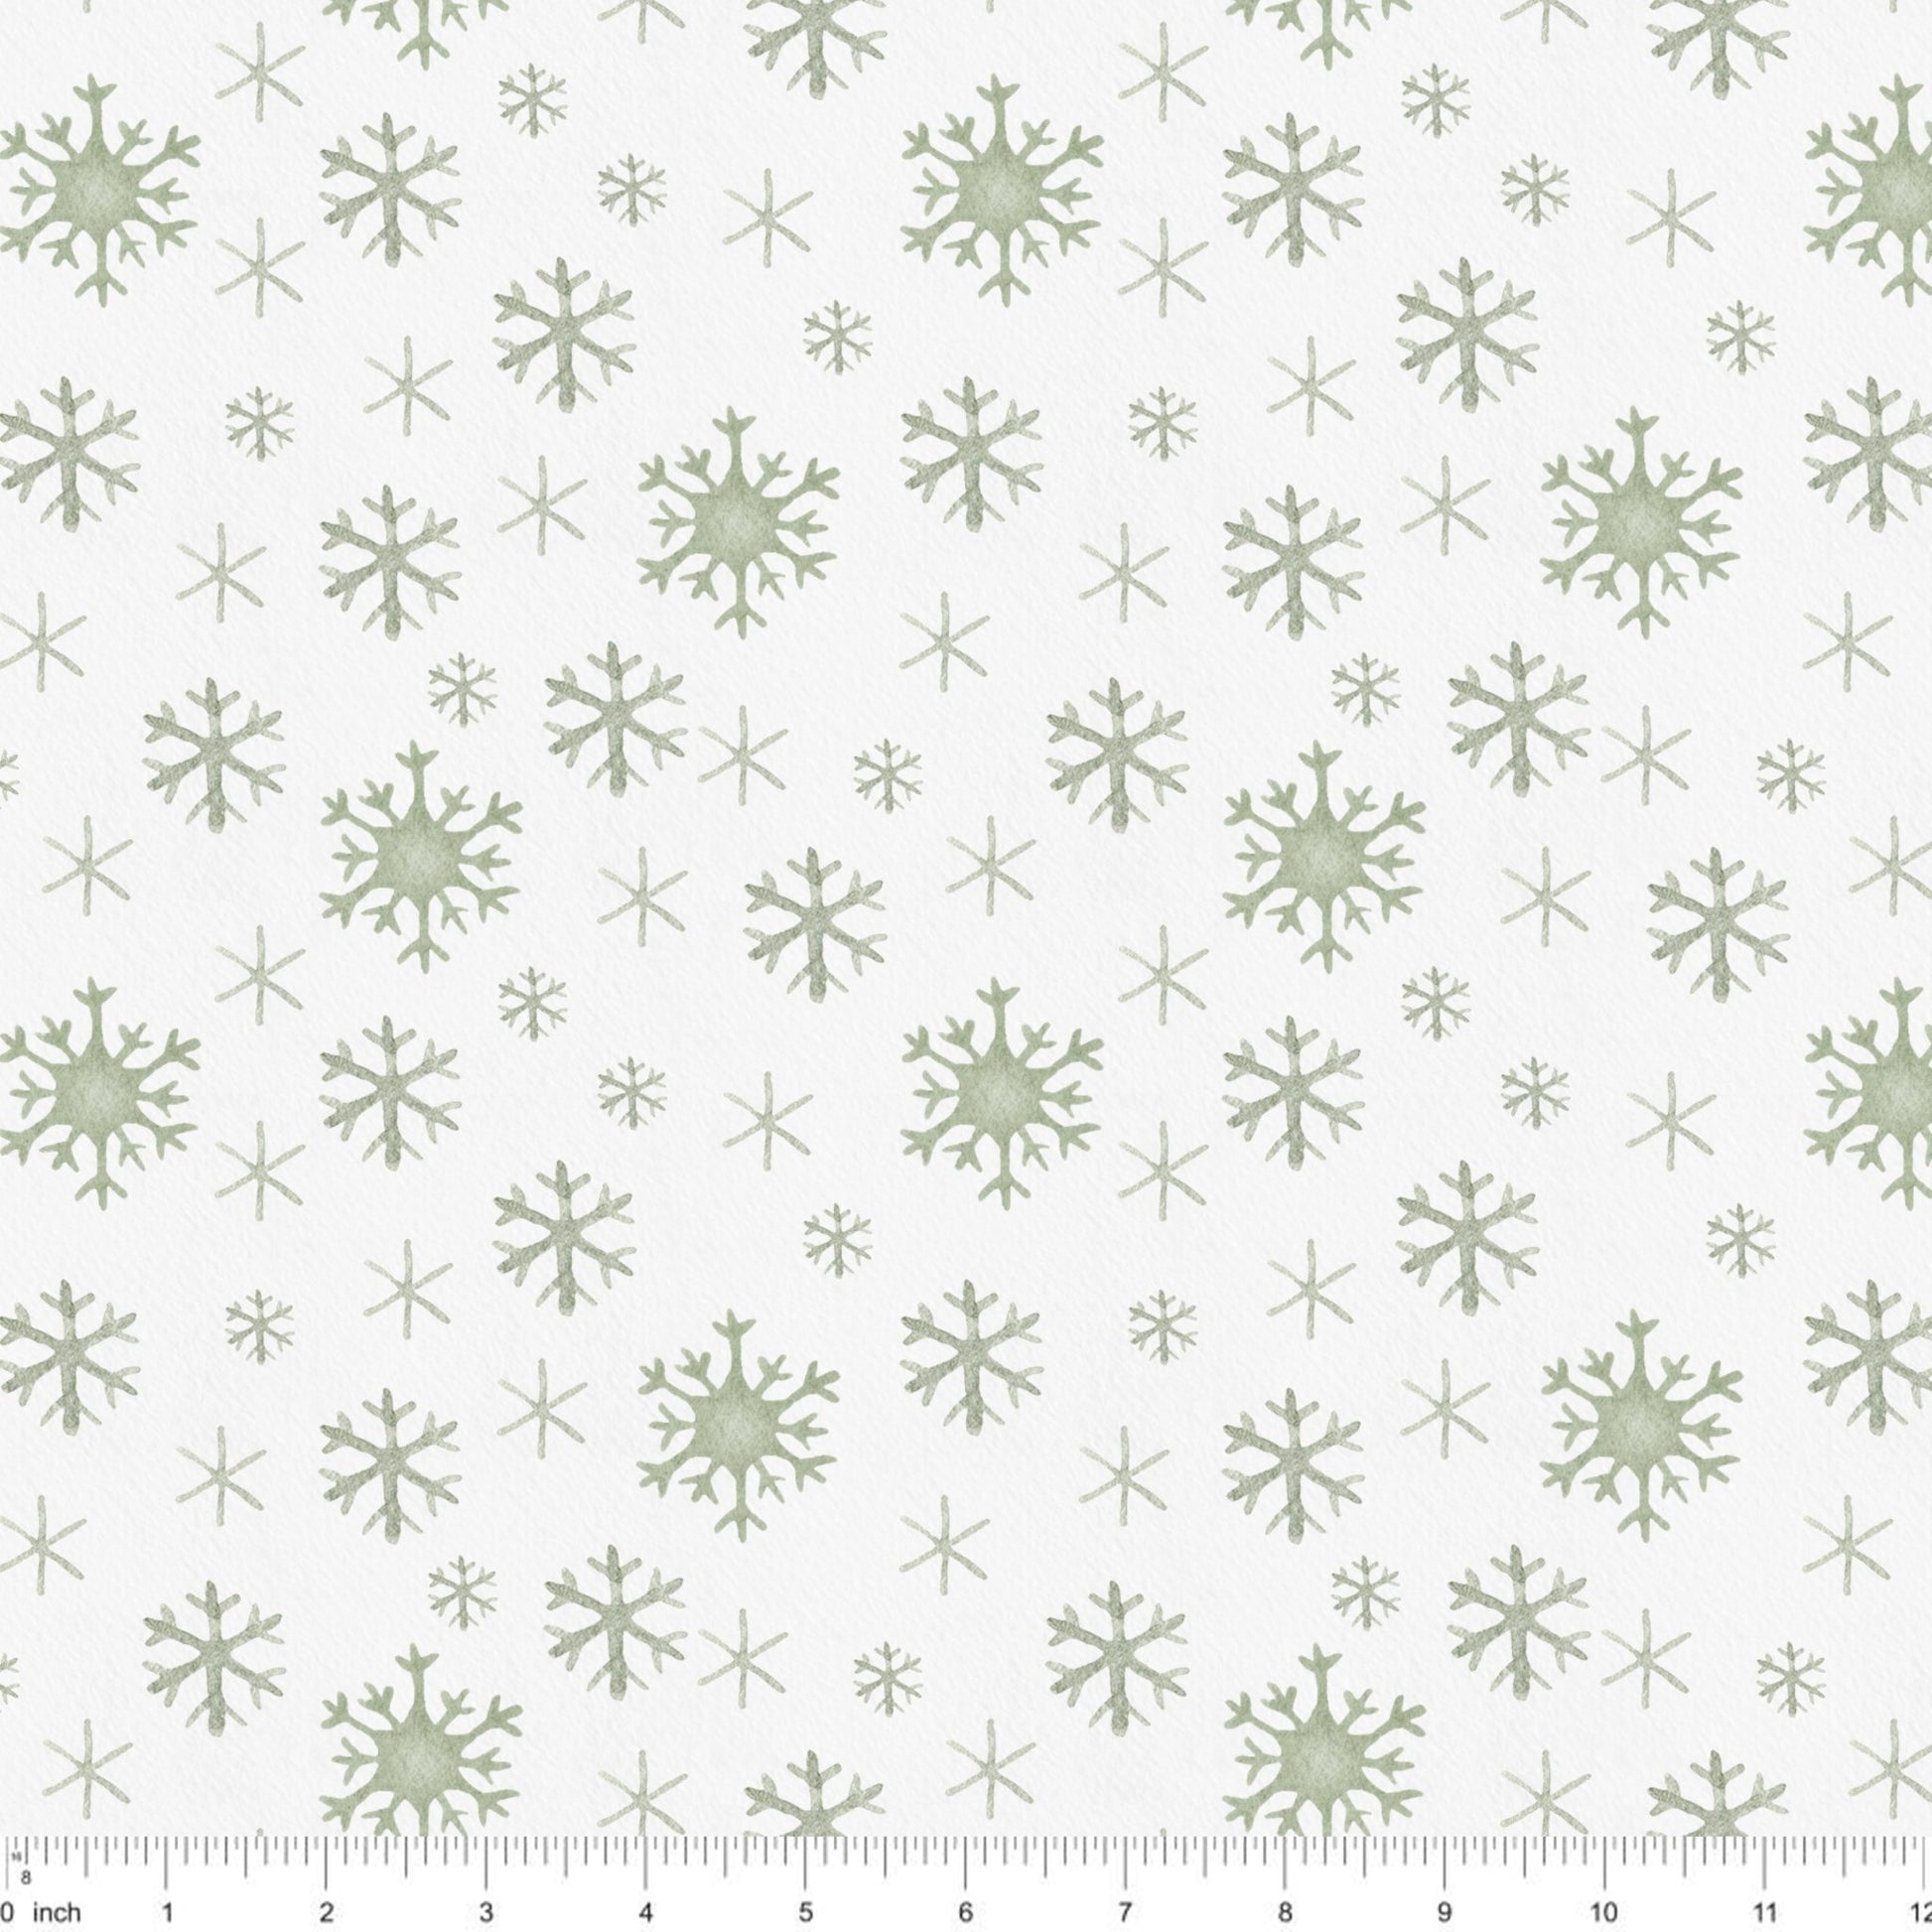 Snowflakes - Grey on White - Winter Owl Coordinate - Little Rhody Sewing Co.